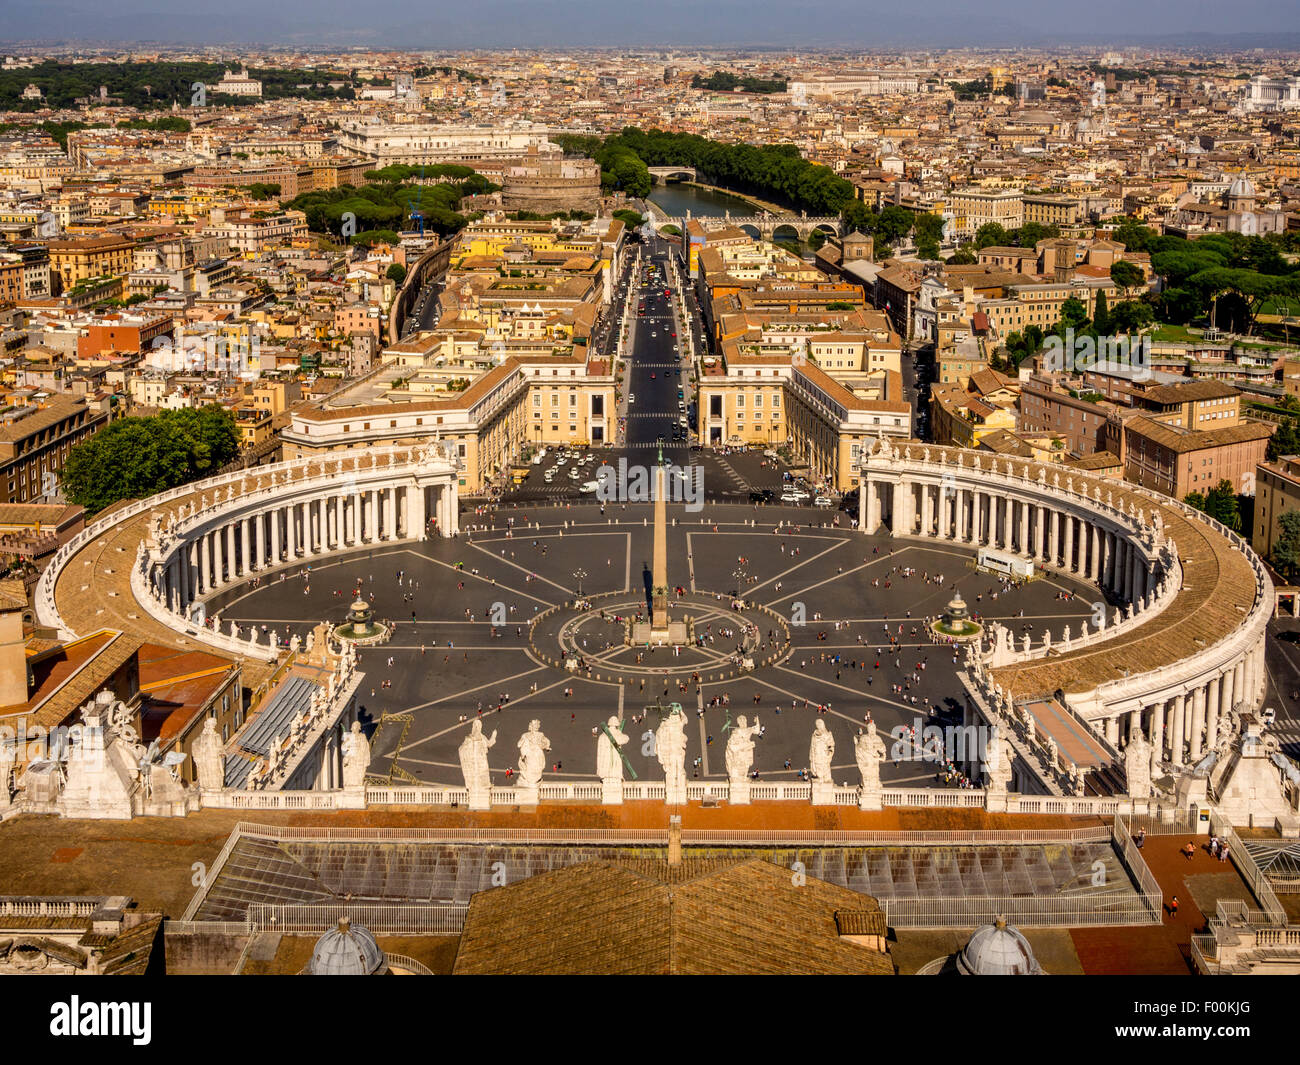 St Peter's Square shot from the dome of St. Peter's Basilica. Vatican City, Rome. Italy. Stock Photo